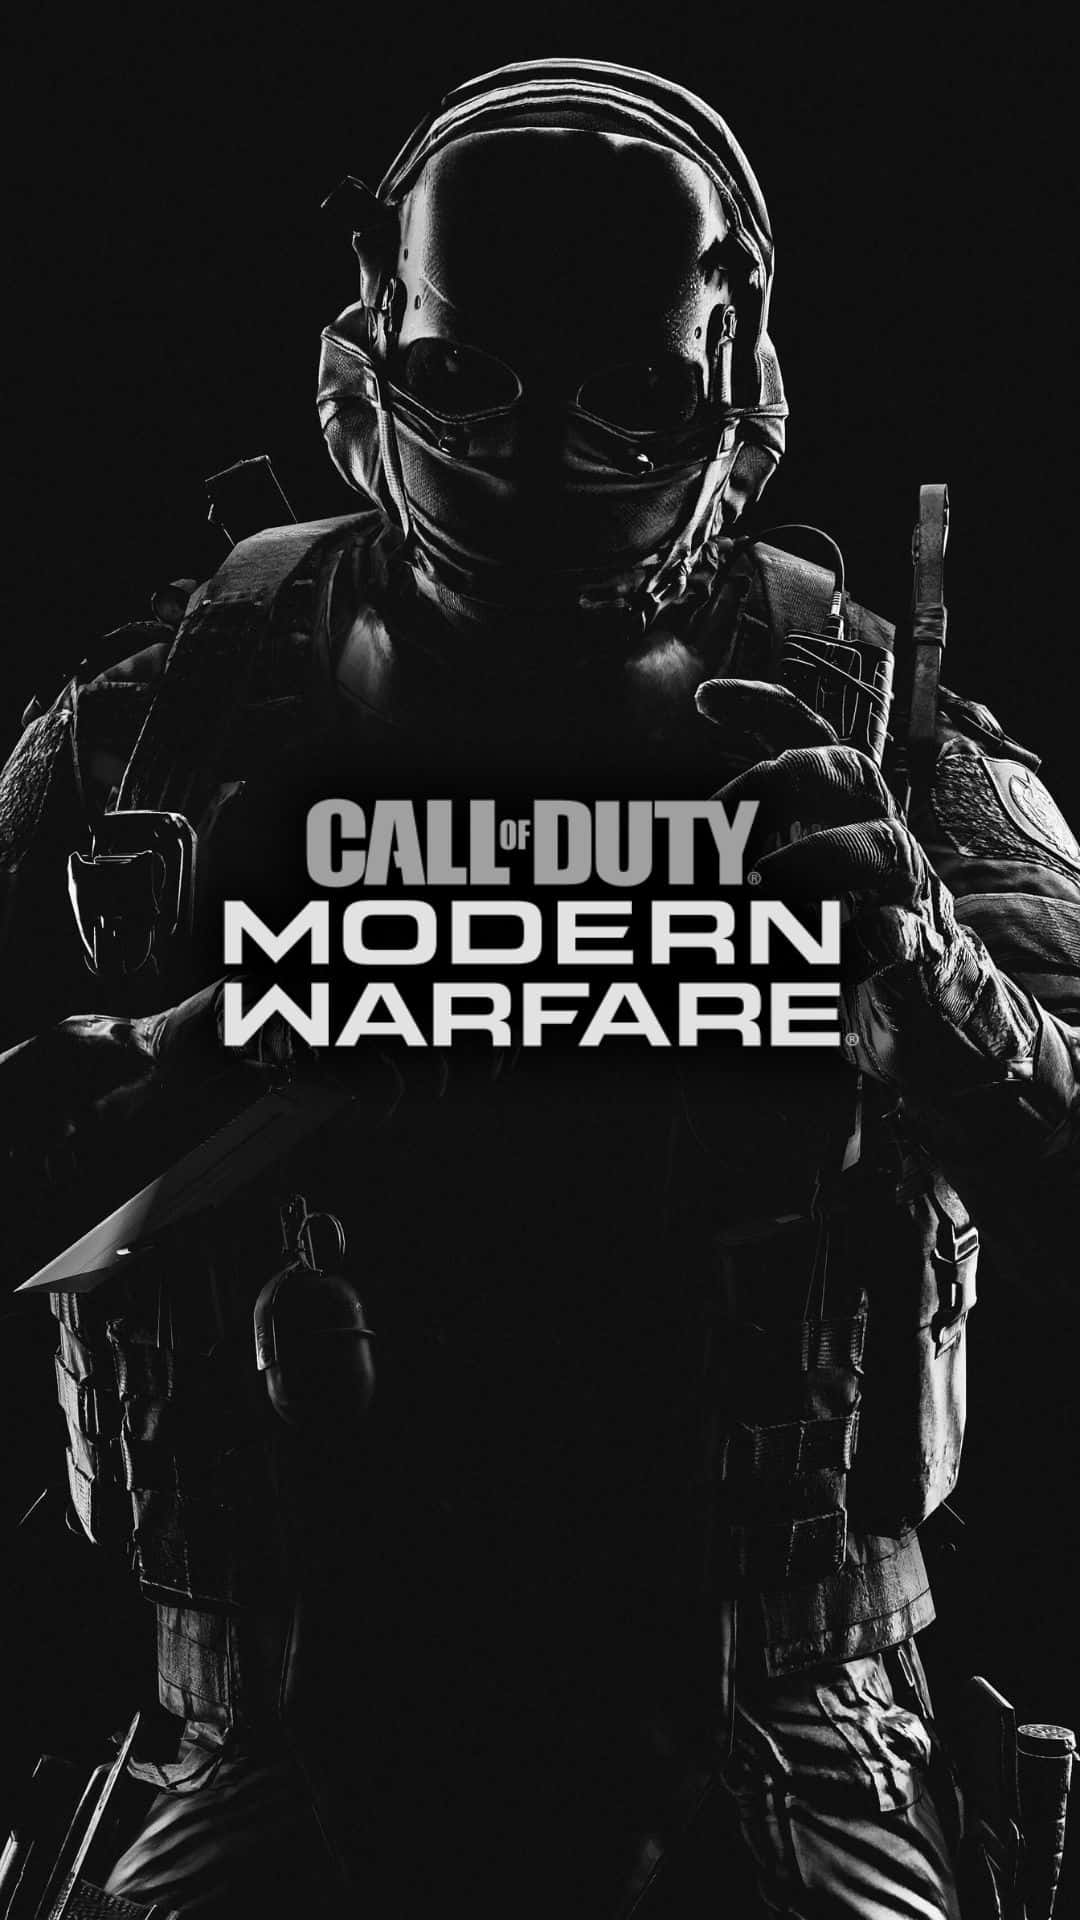 Scopril'entusiasmante Gameplay Di Android Call Of Duty Modern Warfare